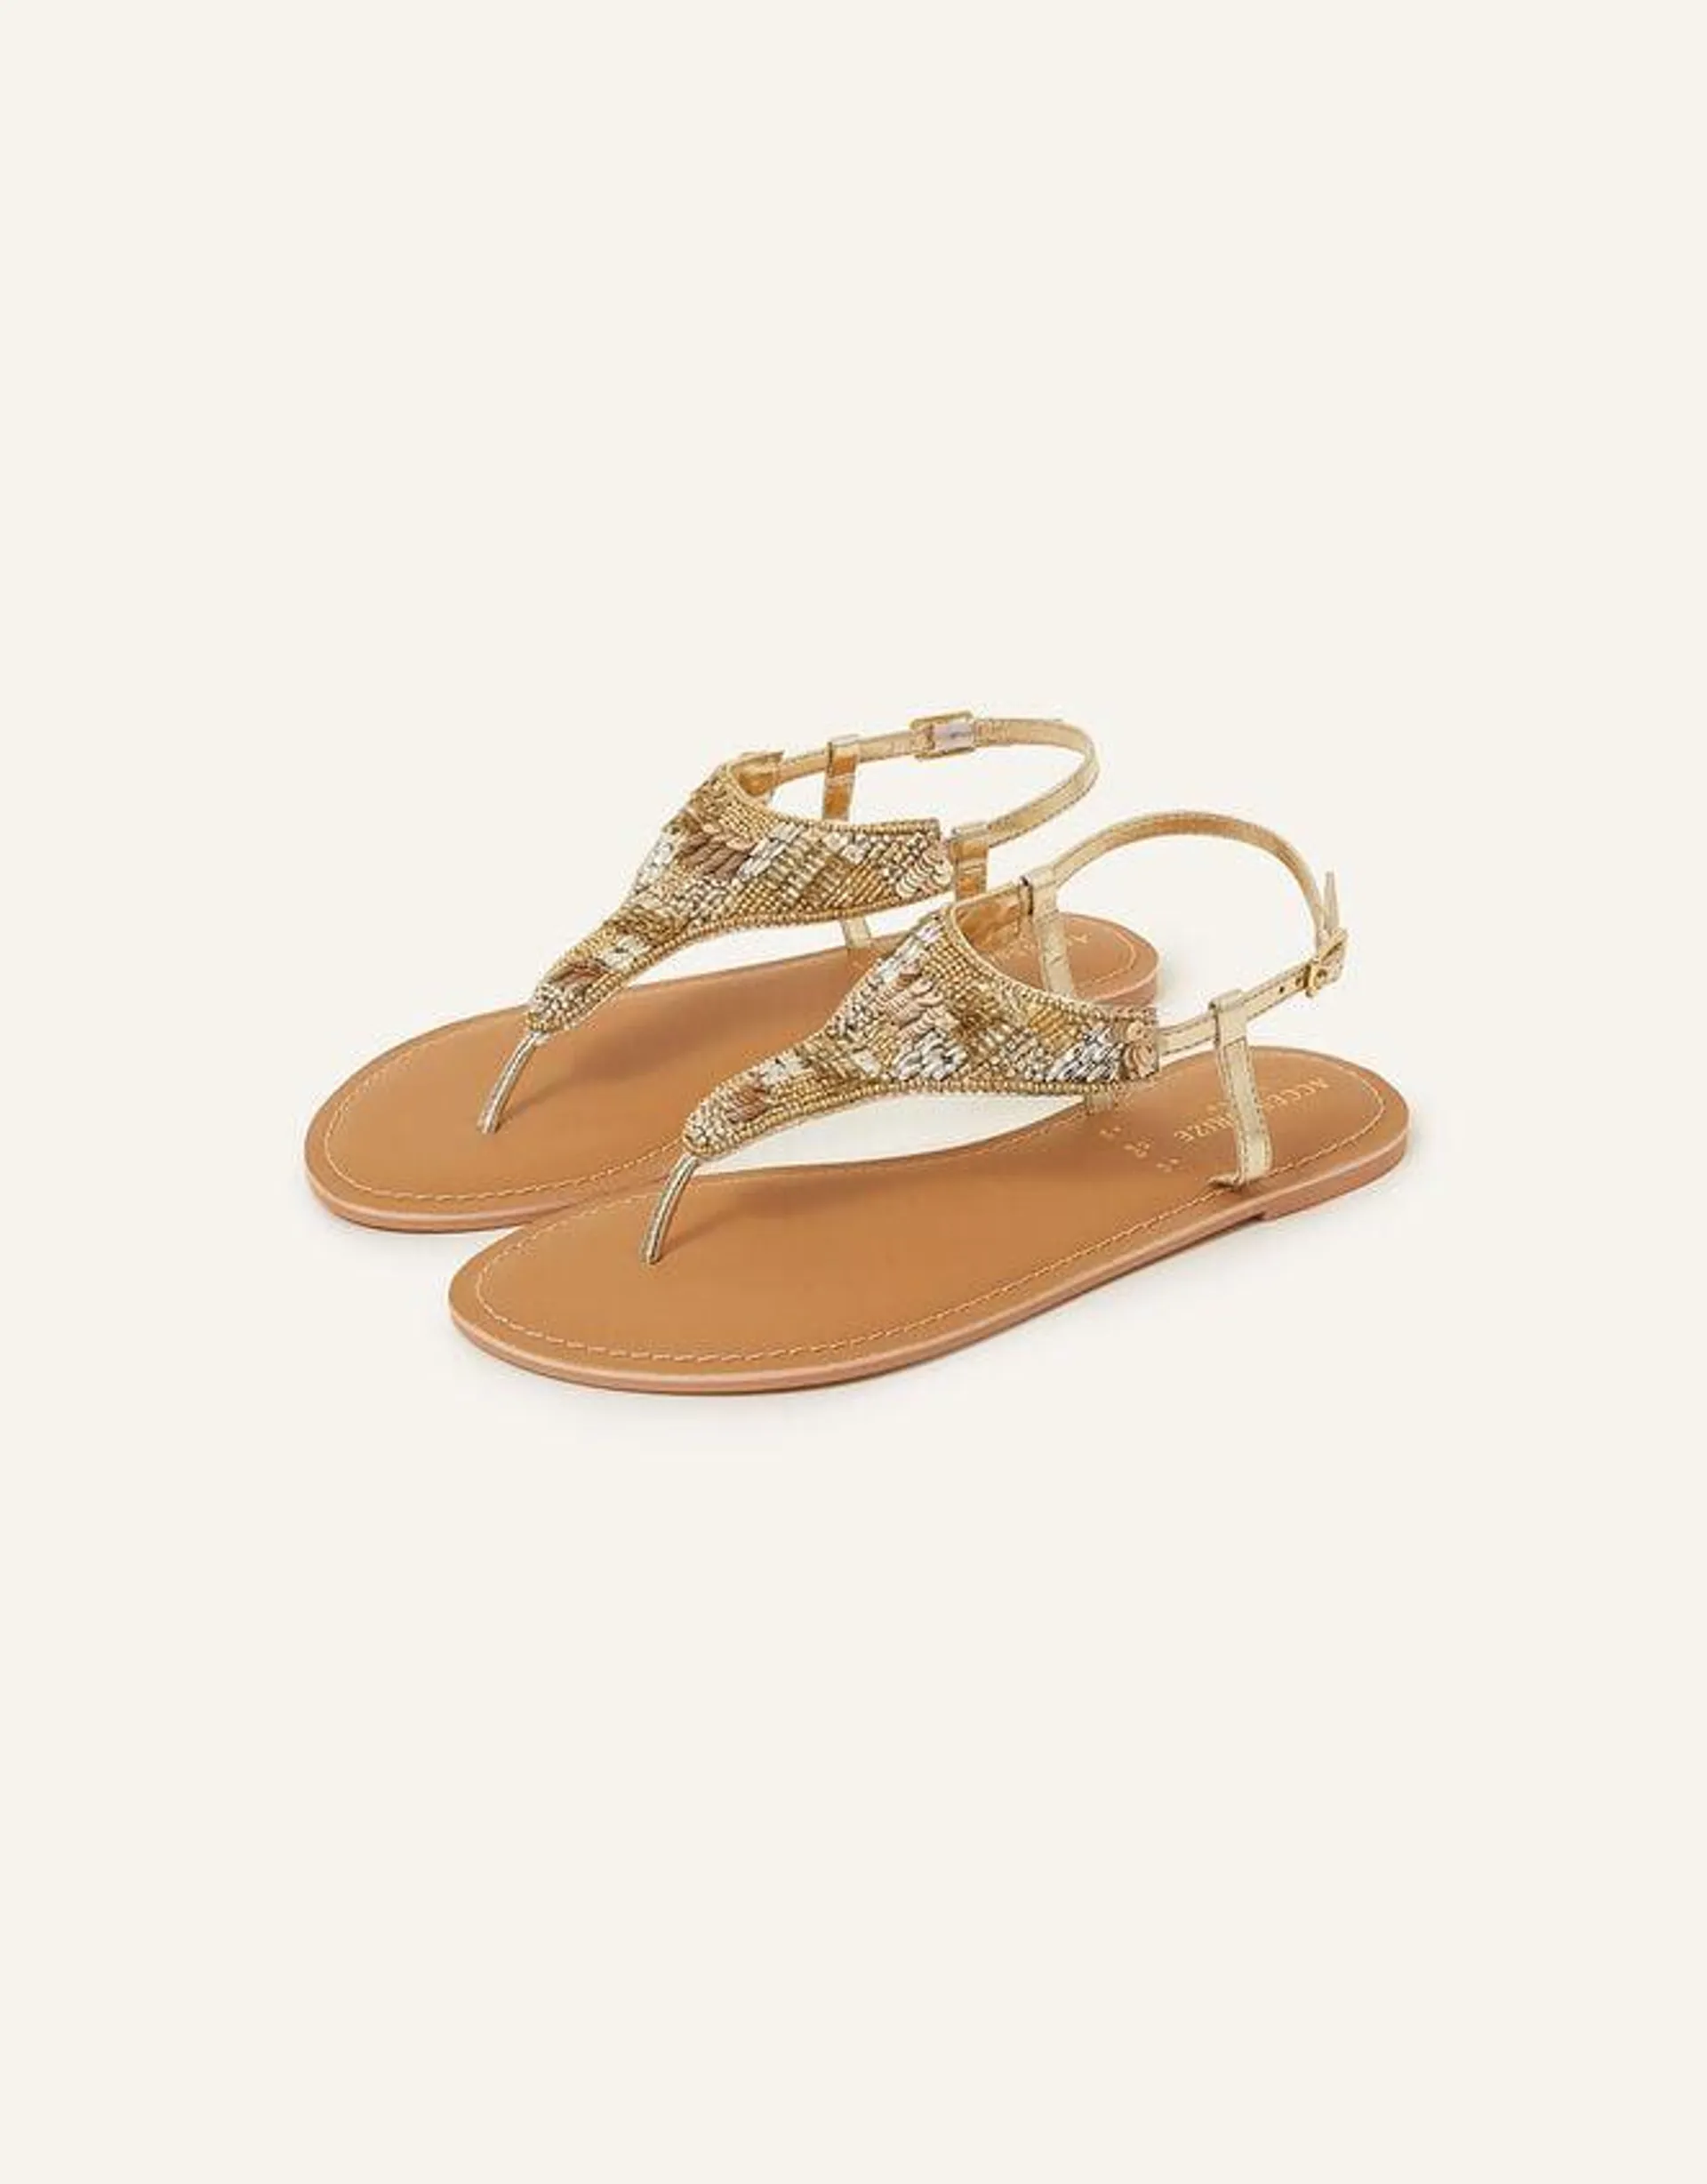 Bead and Sequin Embellished Toe Post Sandals Gold